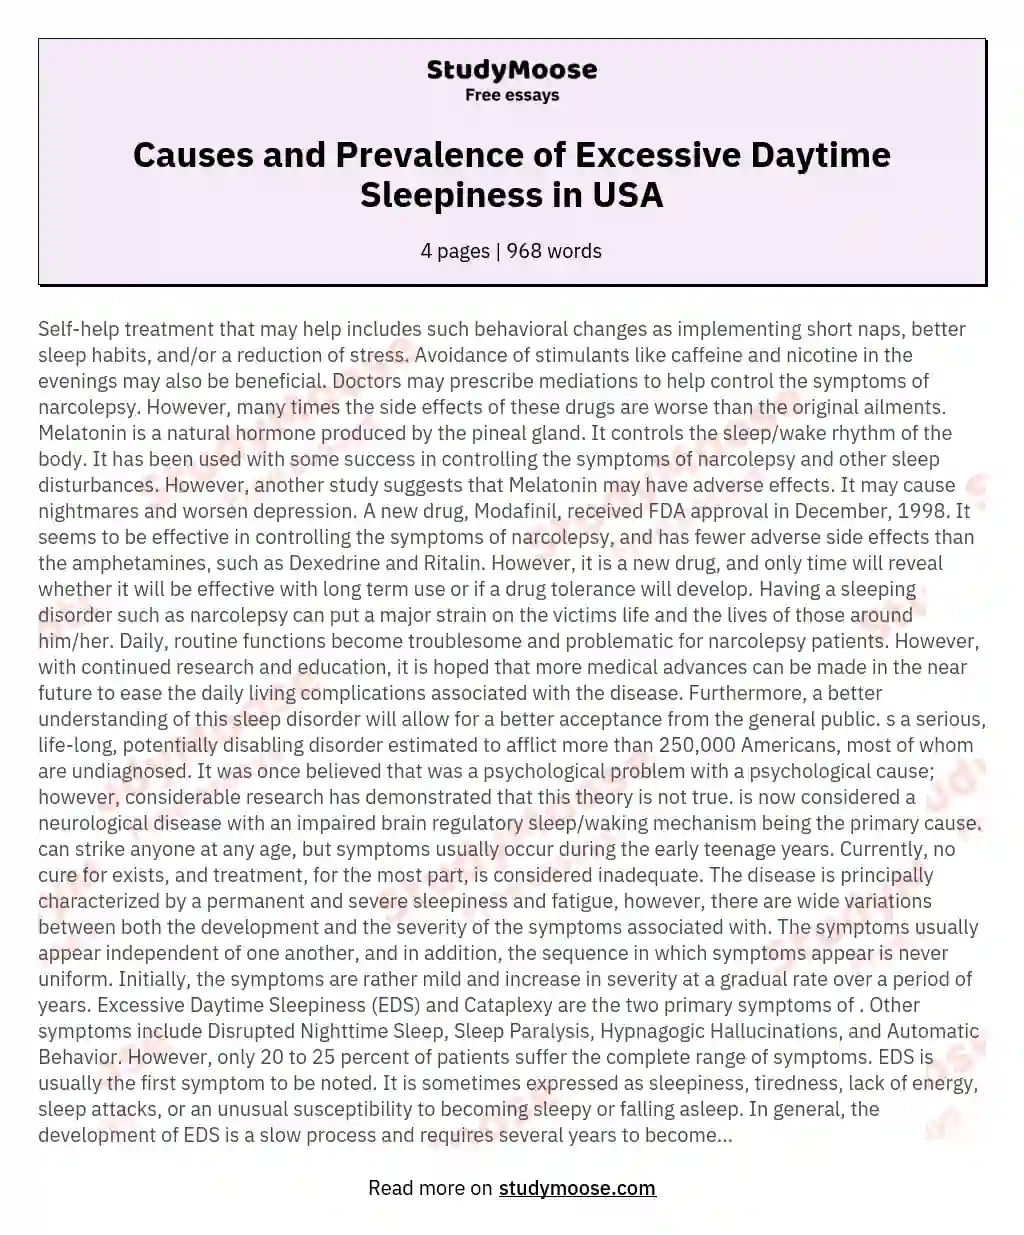 Causes and Prevalence of Excessive Daytime Sleepiness in USA essay